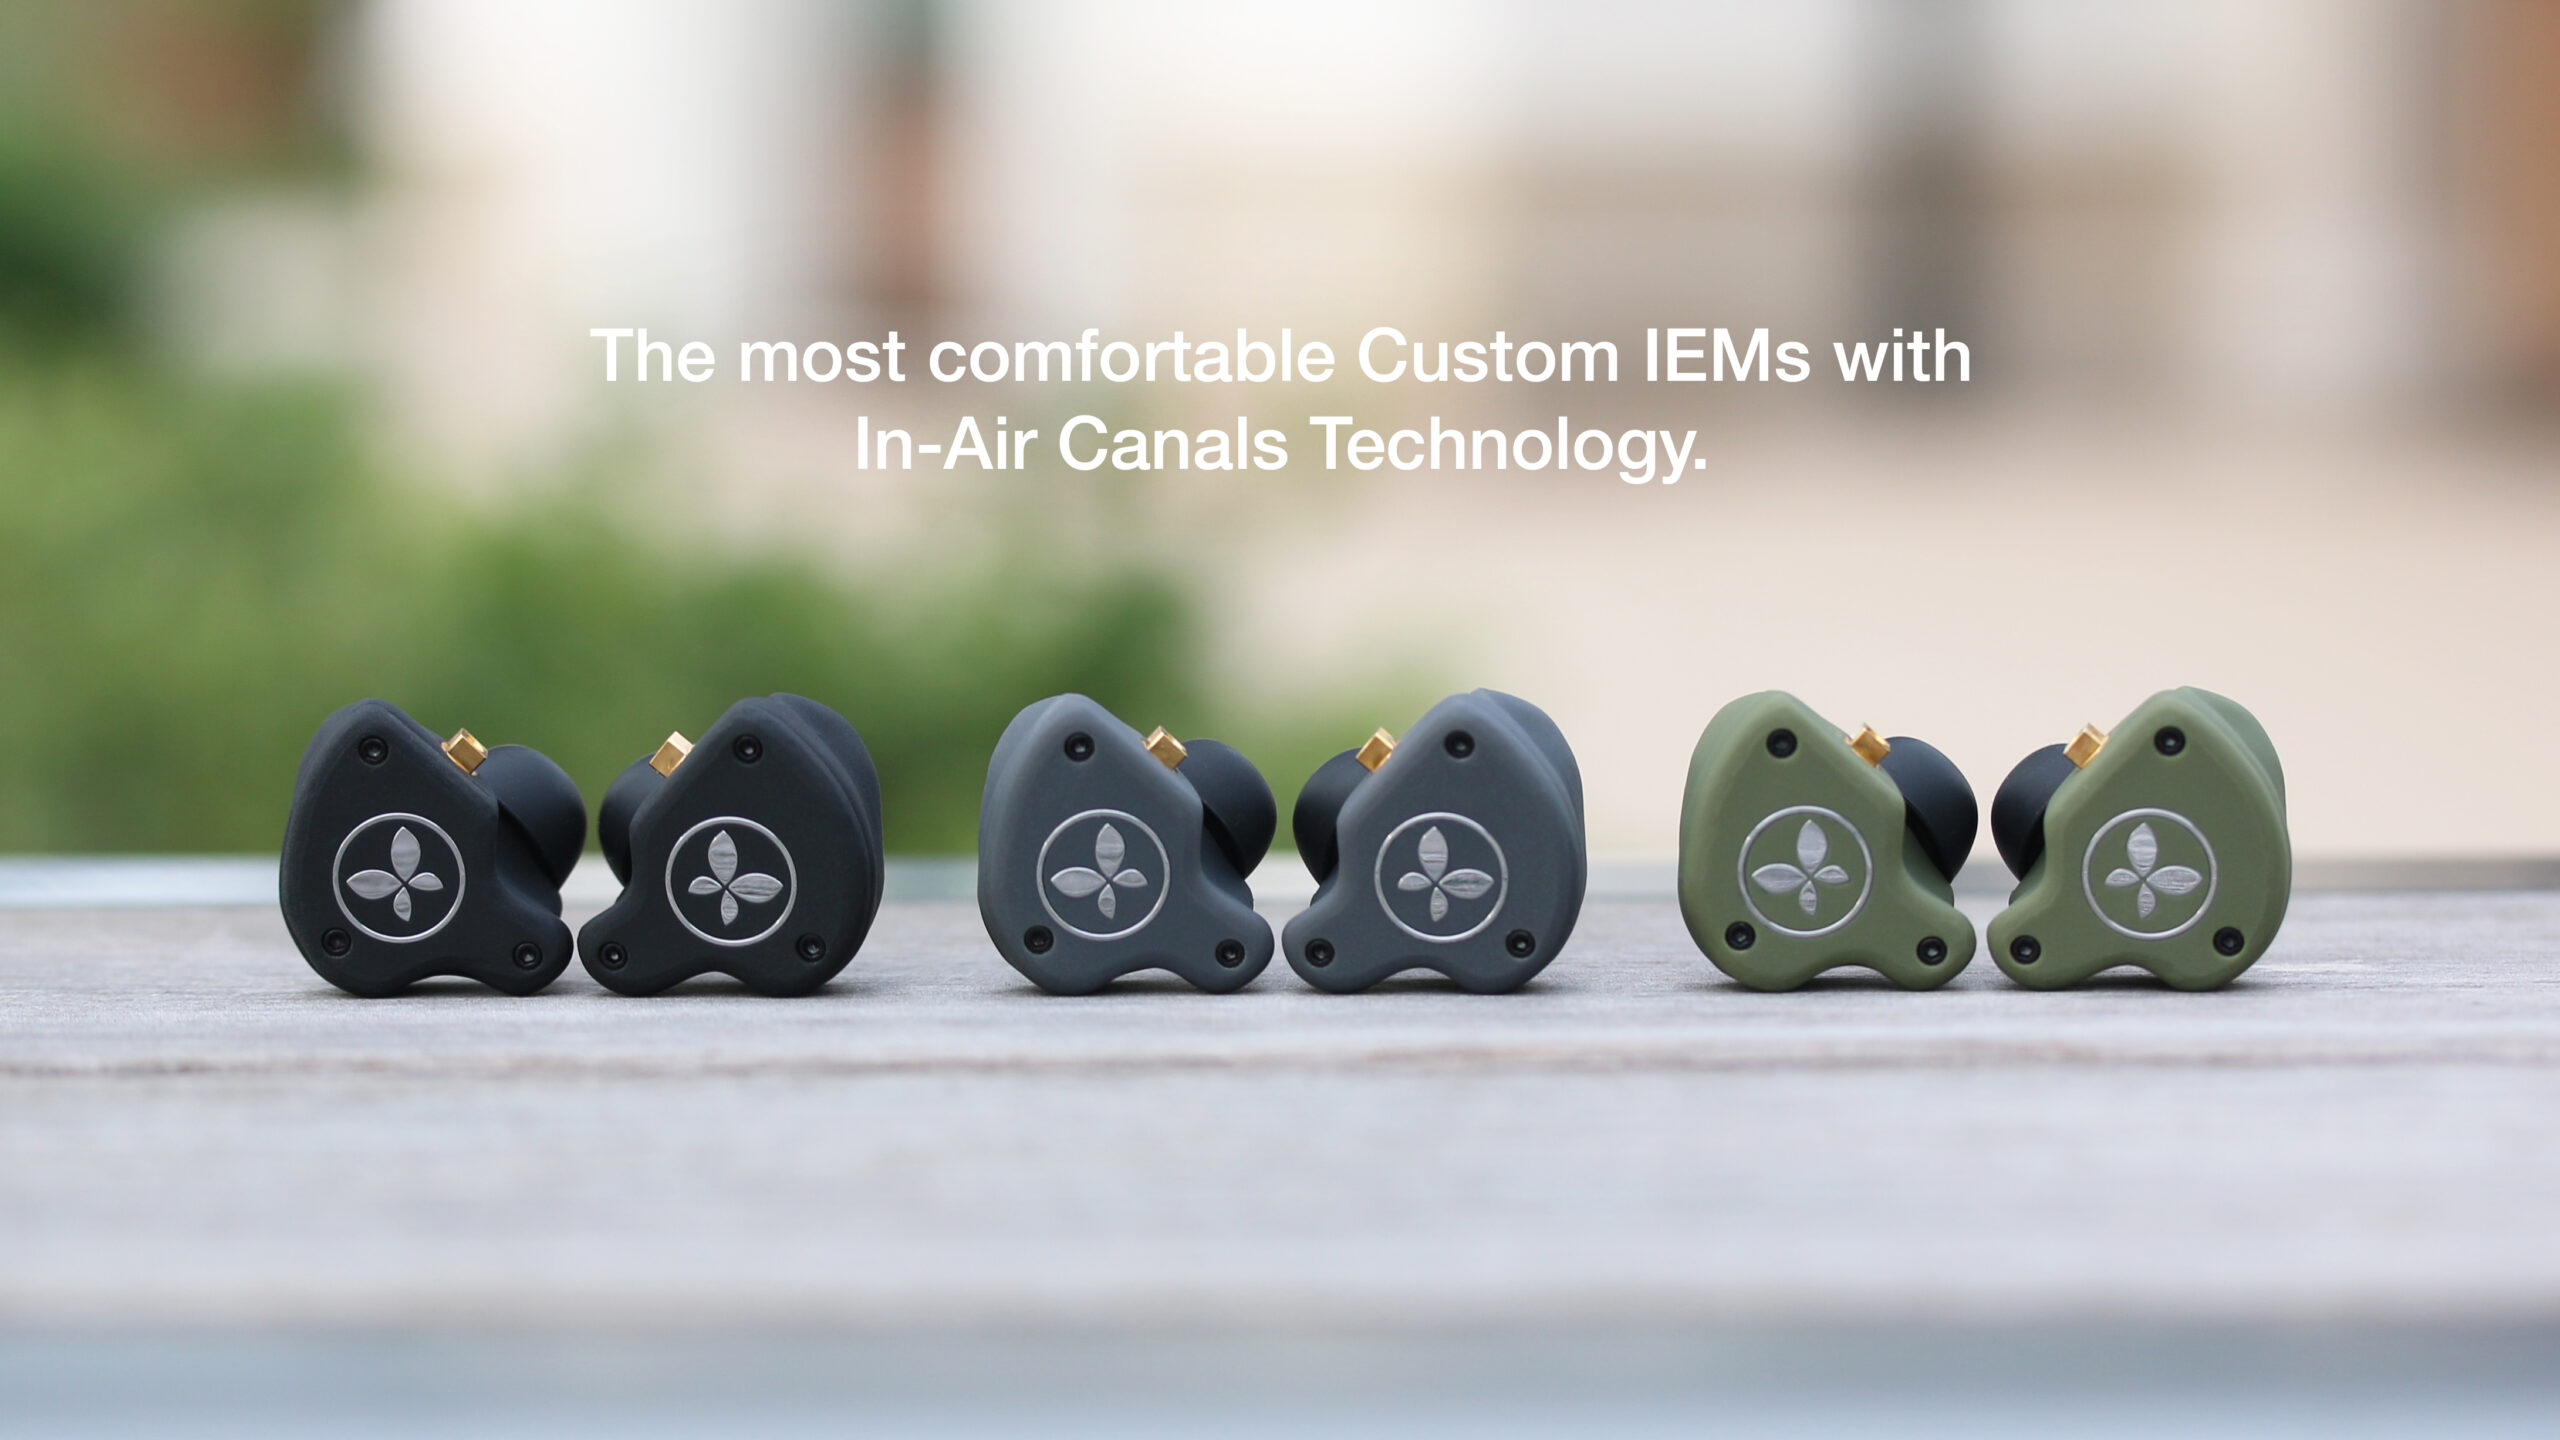 The most comfortable Custom IEMS with In-Air Canals Technology